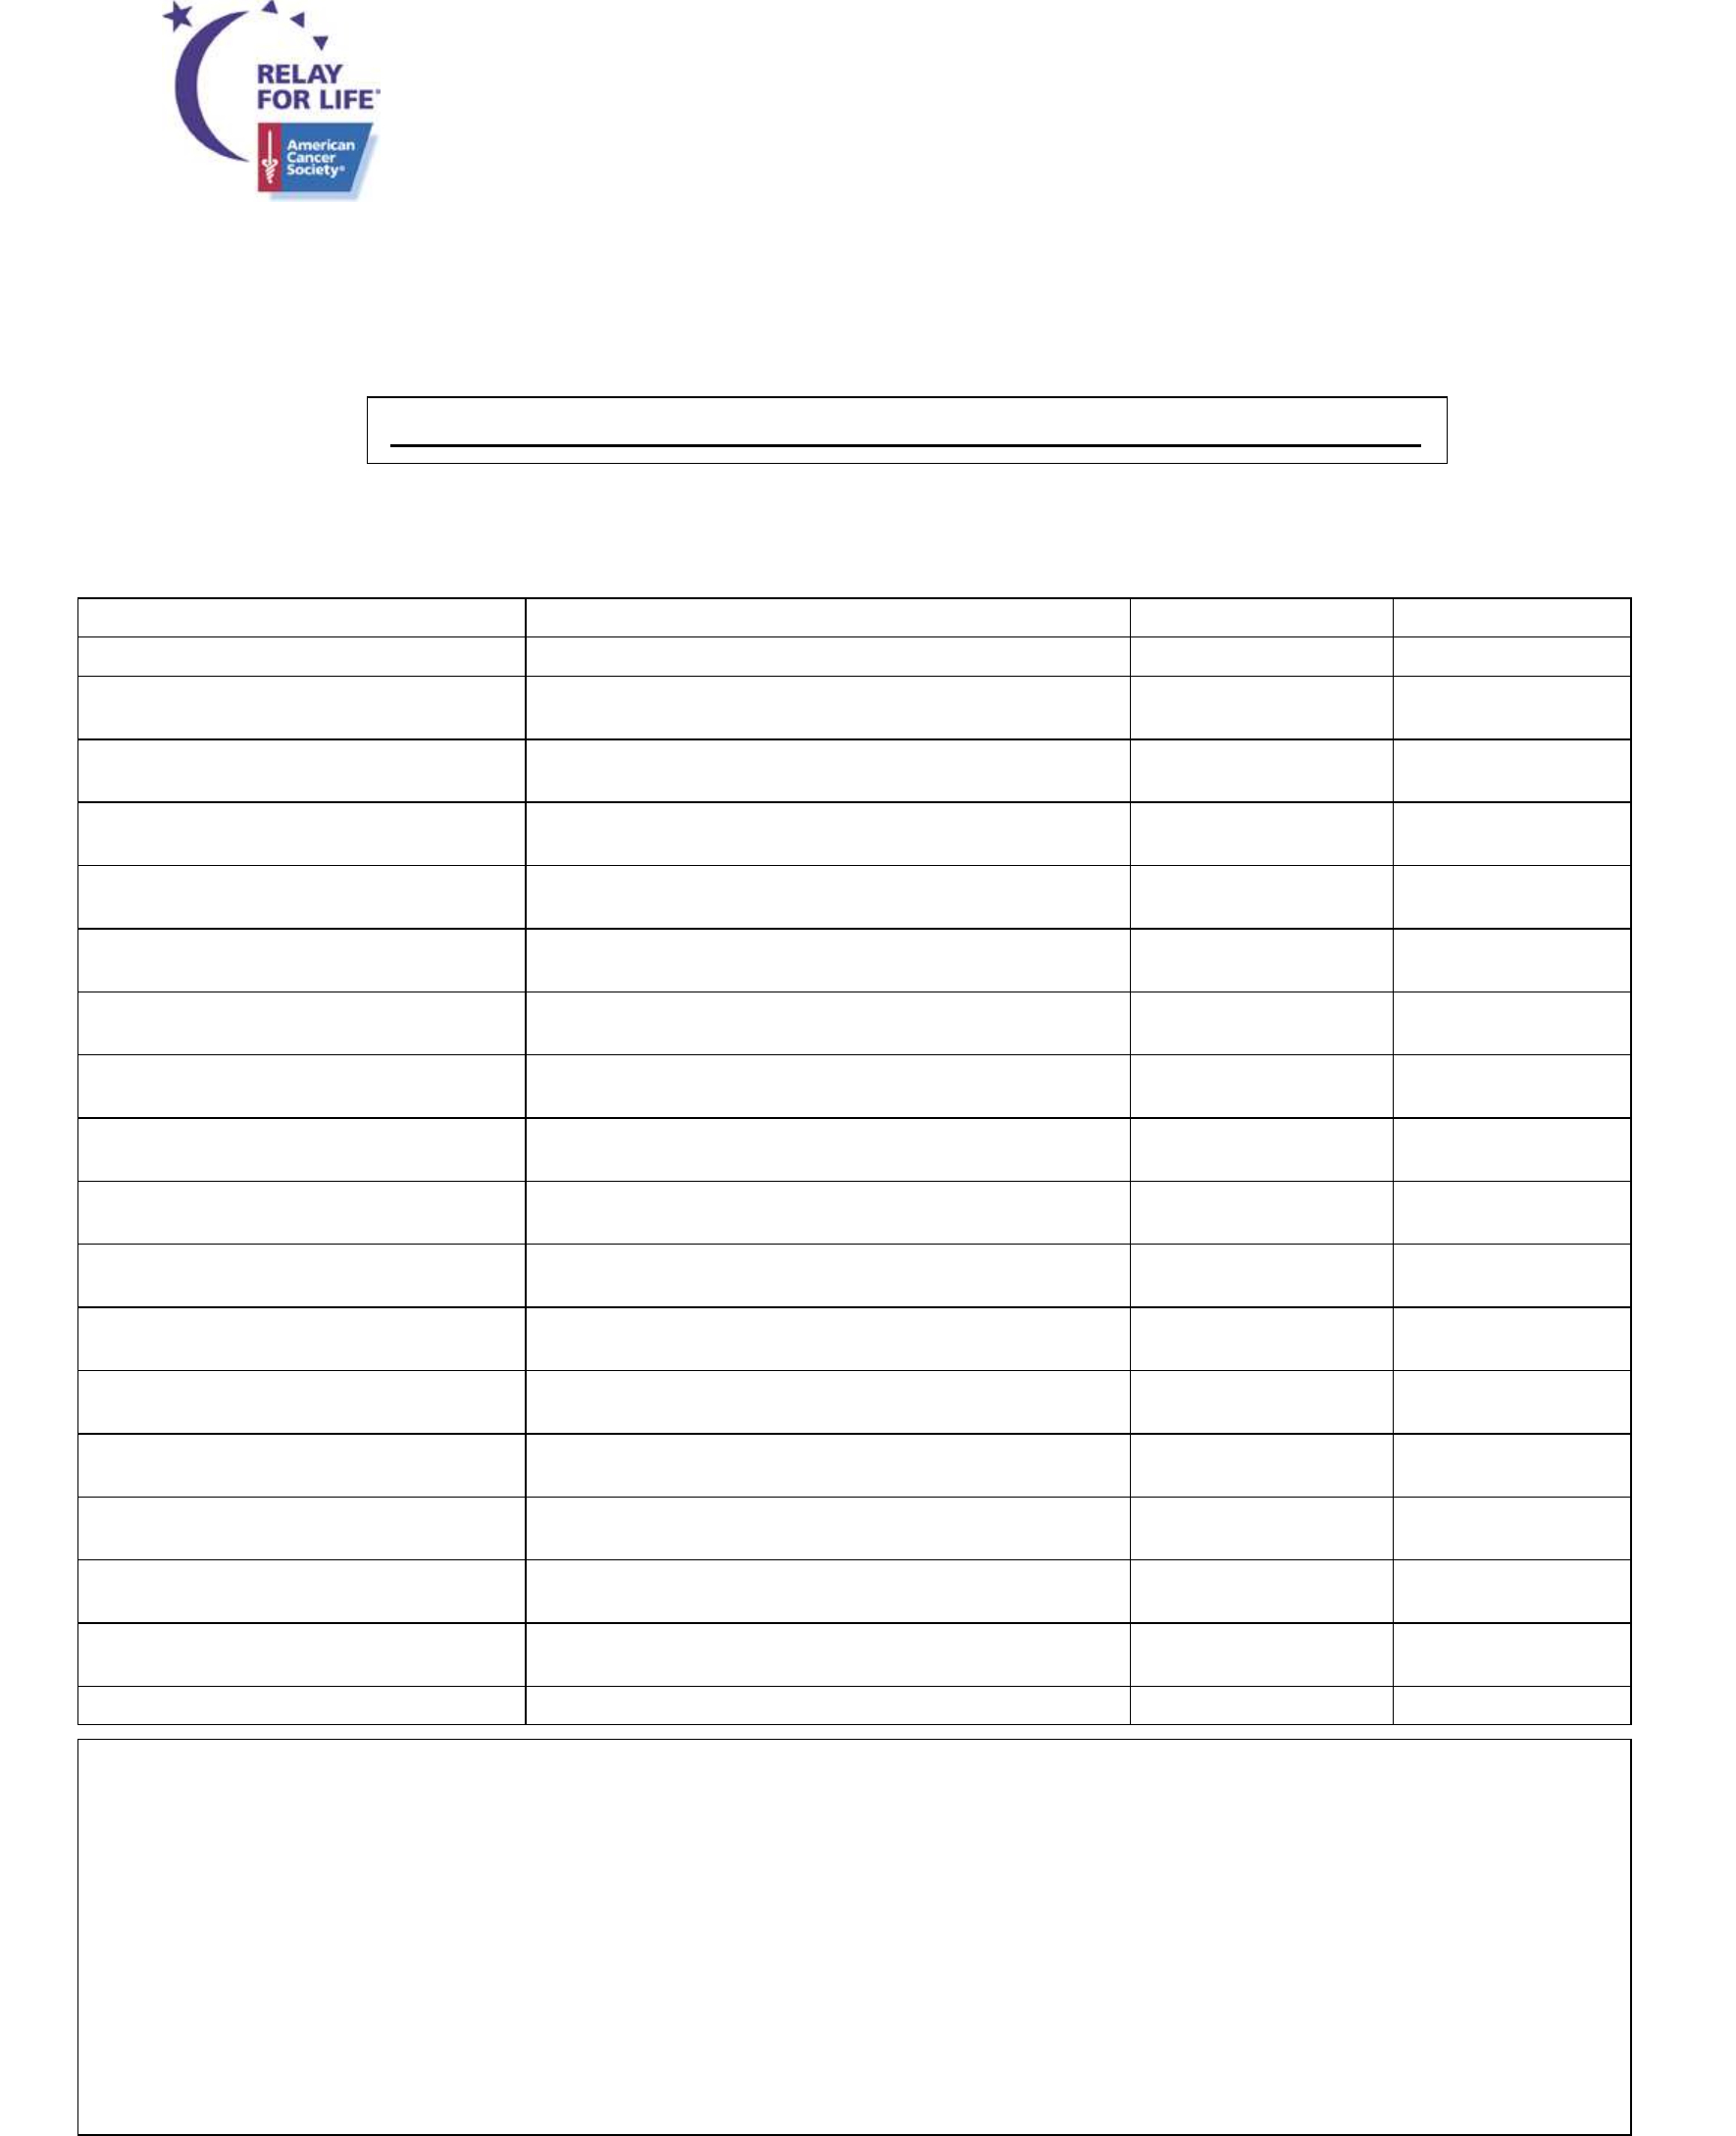 Relay For Life Donation Form – America Free Download With Regard To Blank Sponsor Form Template Free